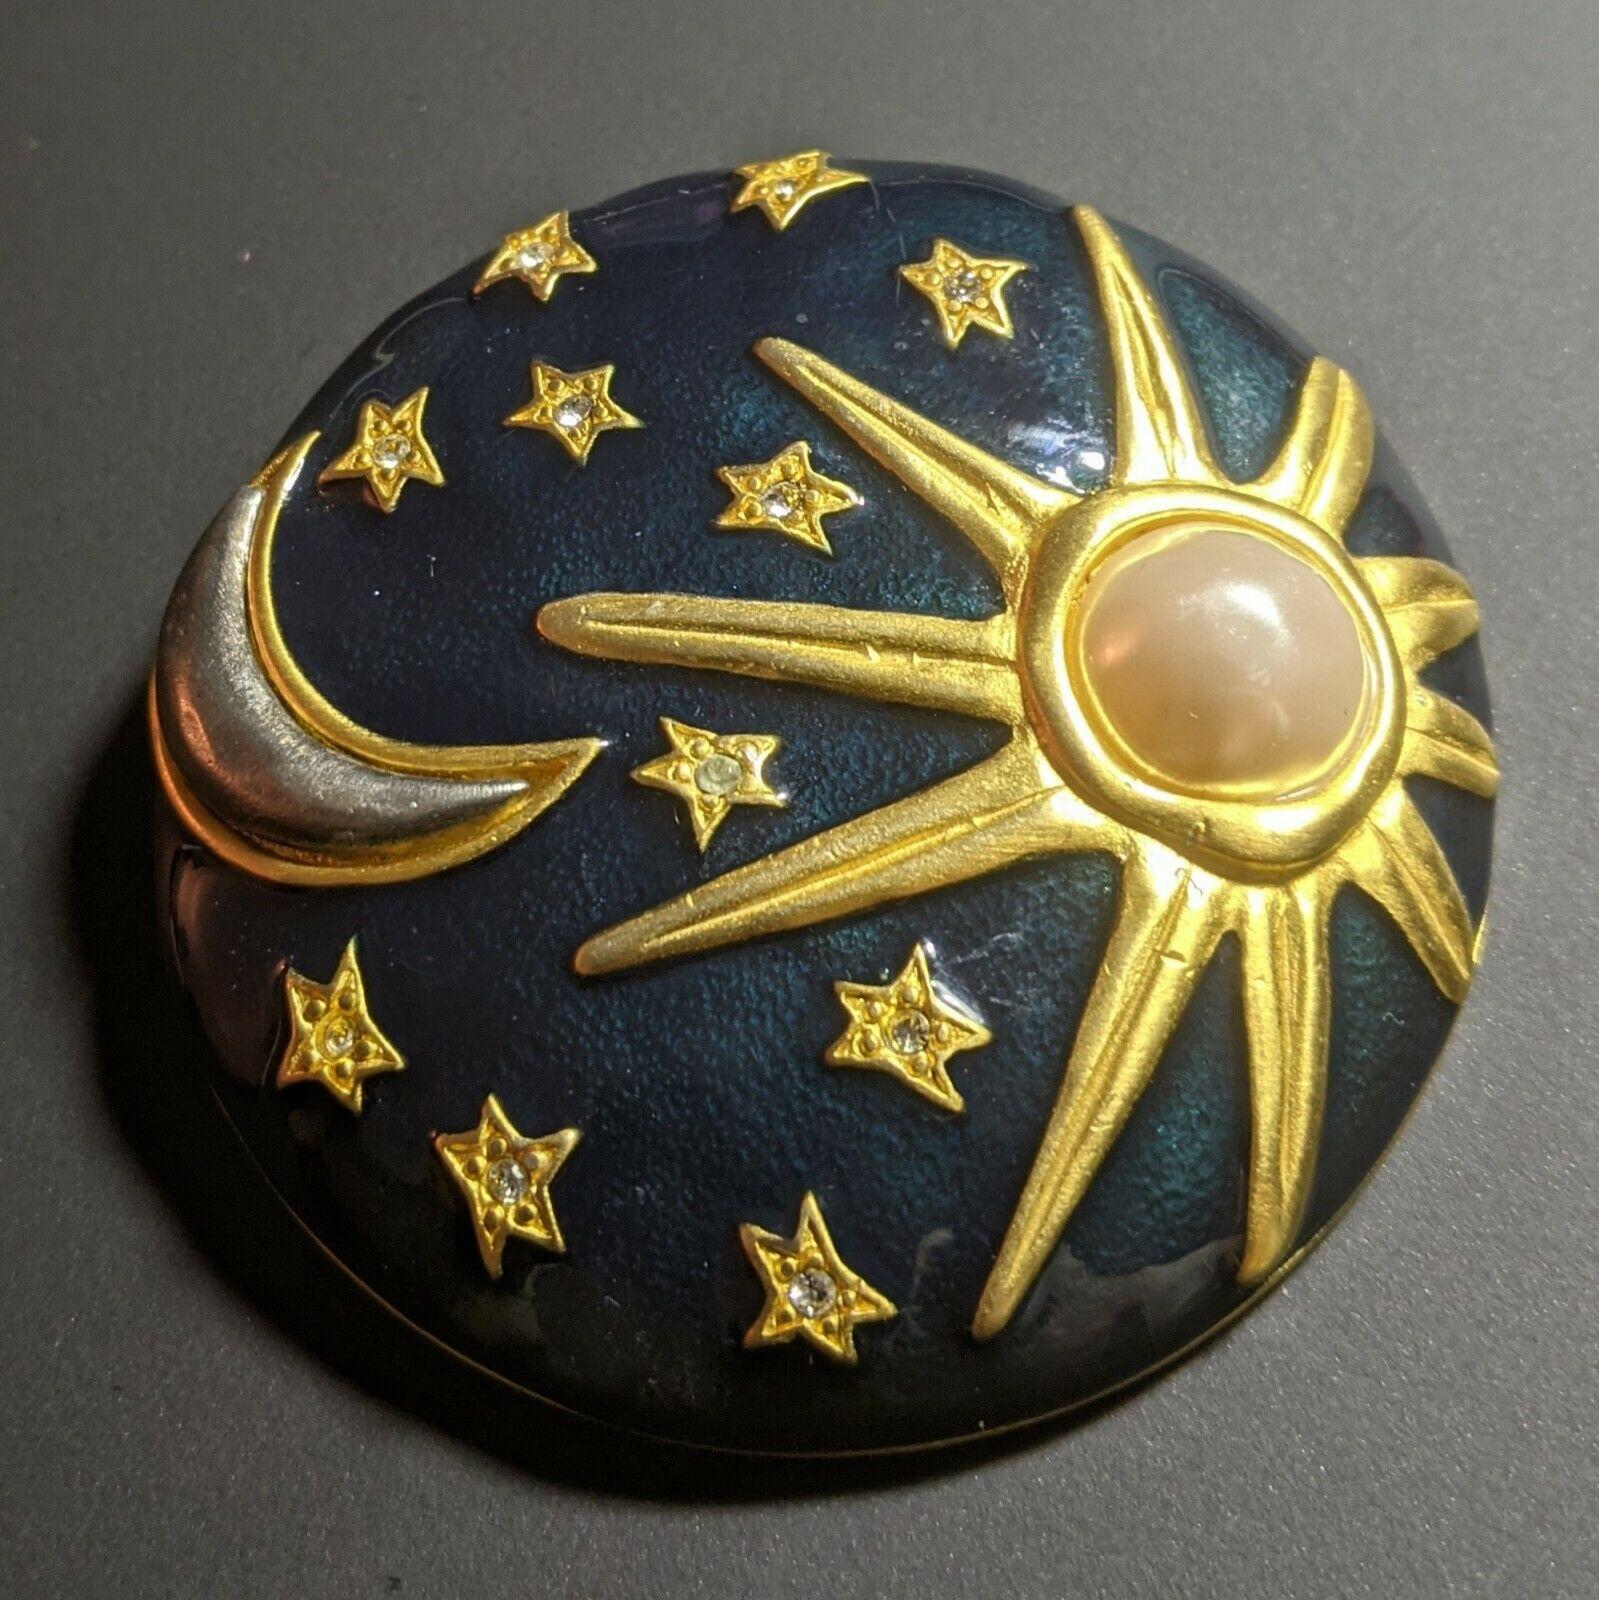 Magnificent large BROOCH,
vintage,
by Karl LAGERFELD, signed,
diameter 5.7 cm, weight 37 g,
very good state.

Born in Hamburg, Karl Lagerfeld settled in Paris in 1954. His design of a coat won him the International Wool Secretariat and allowed him